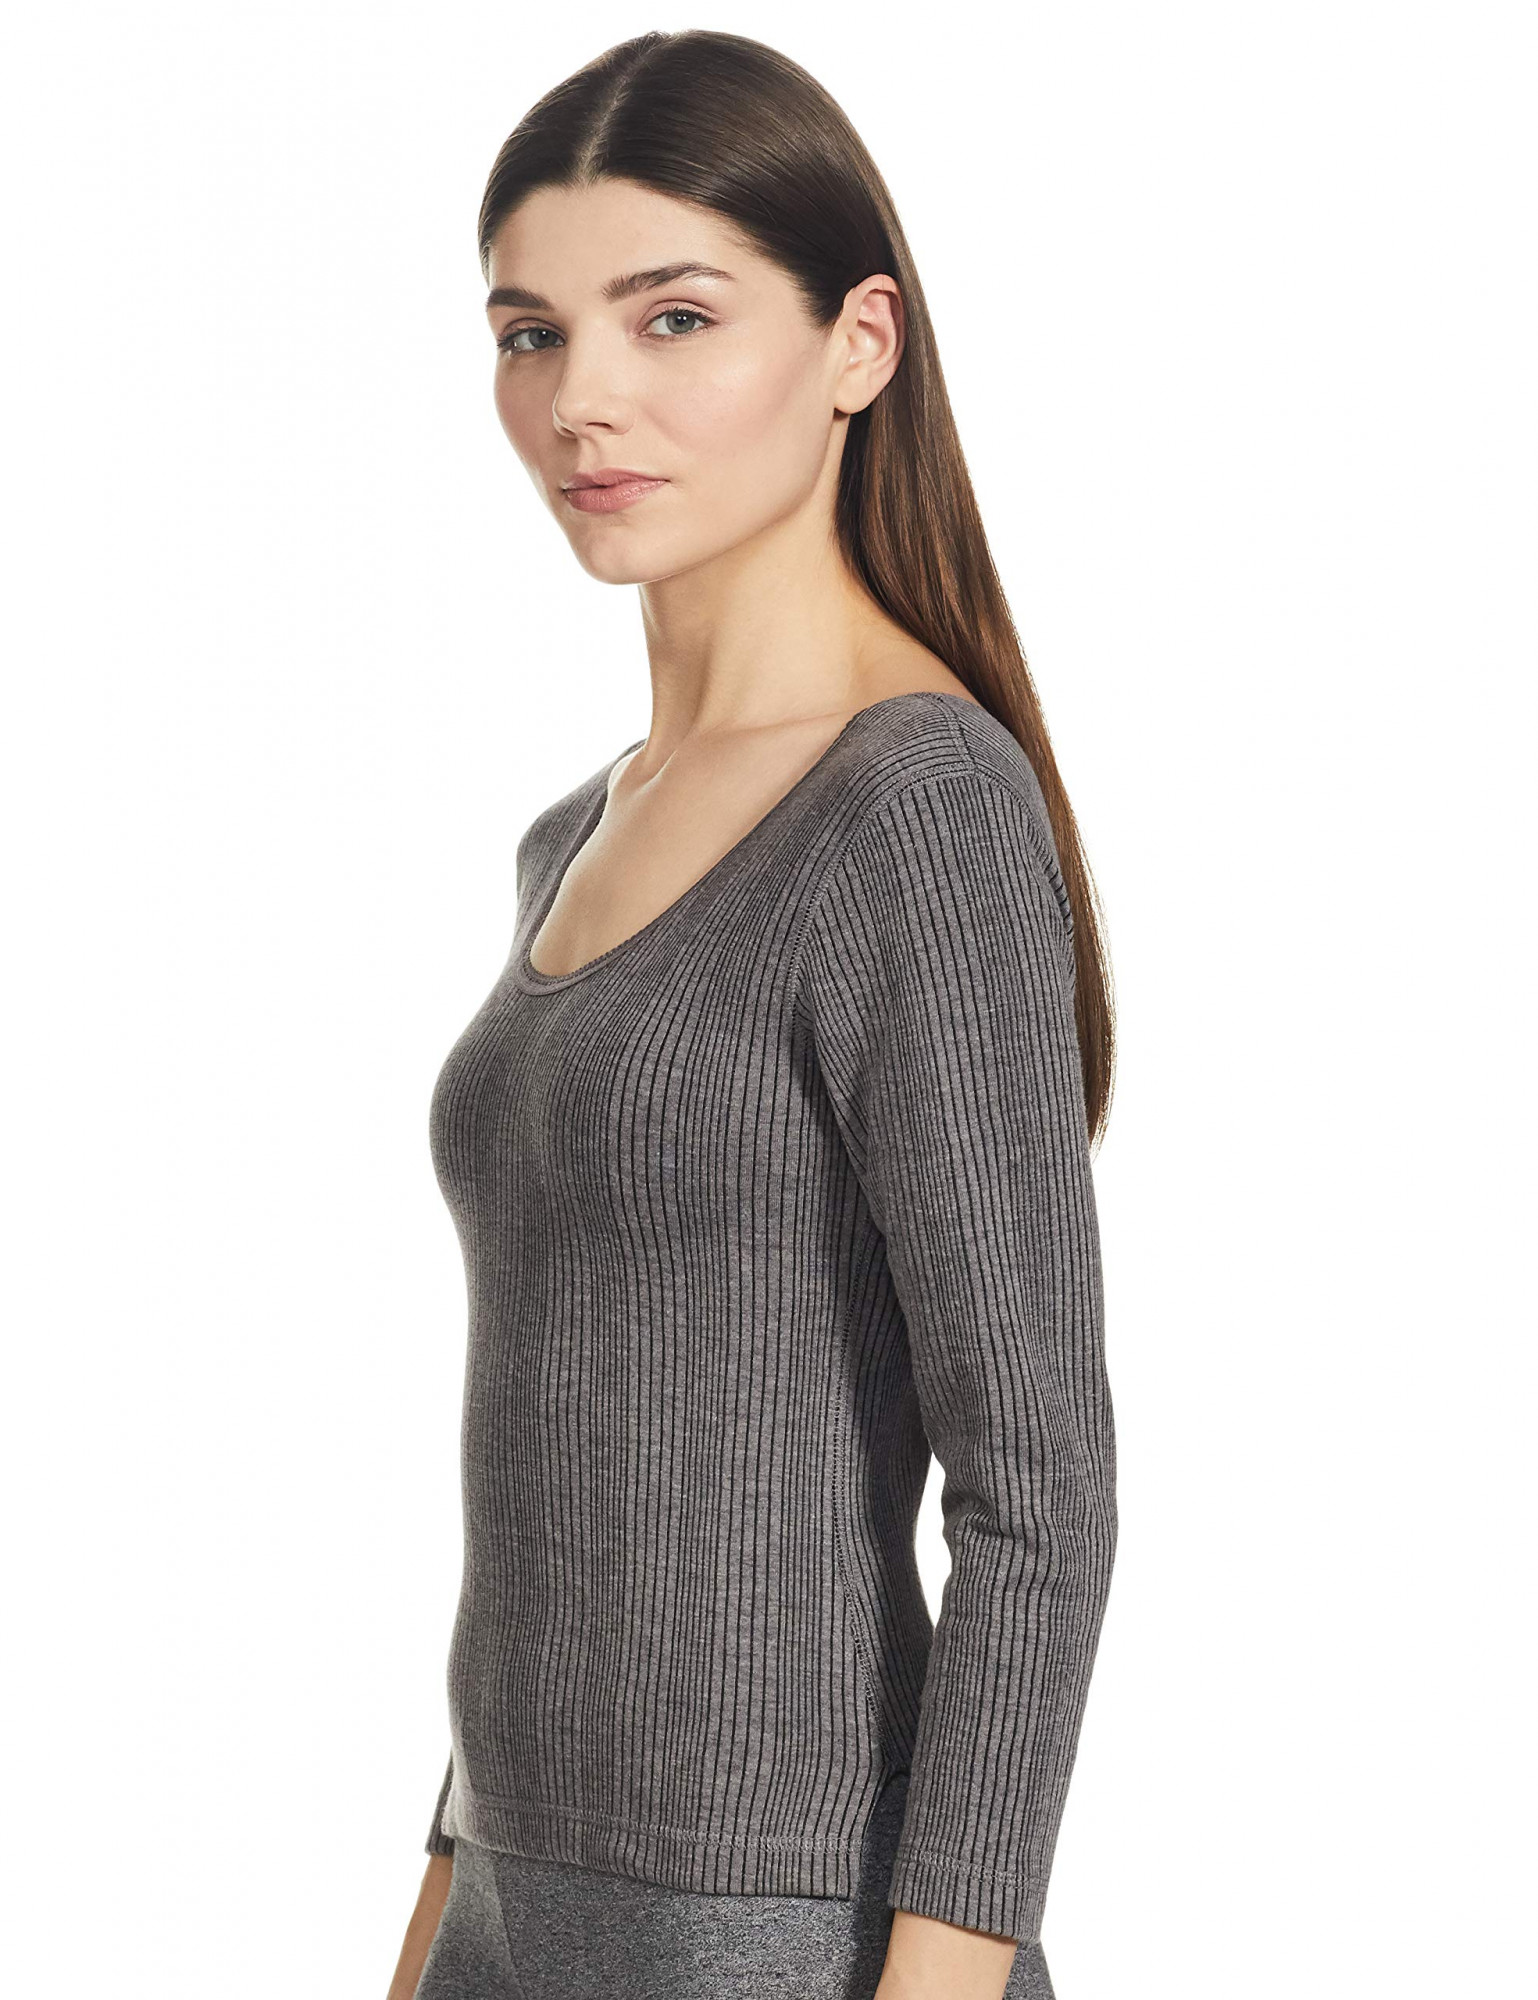 LUX INFERNO Women Top Thermal - Buy LUX INFERNO Women Top Thermal